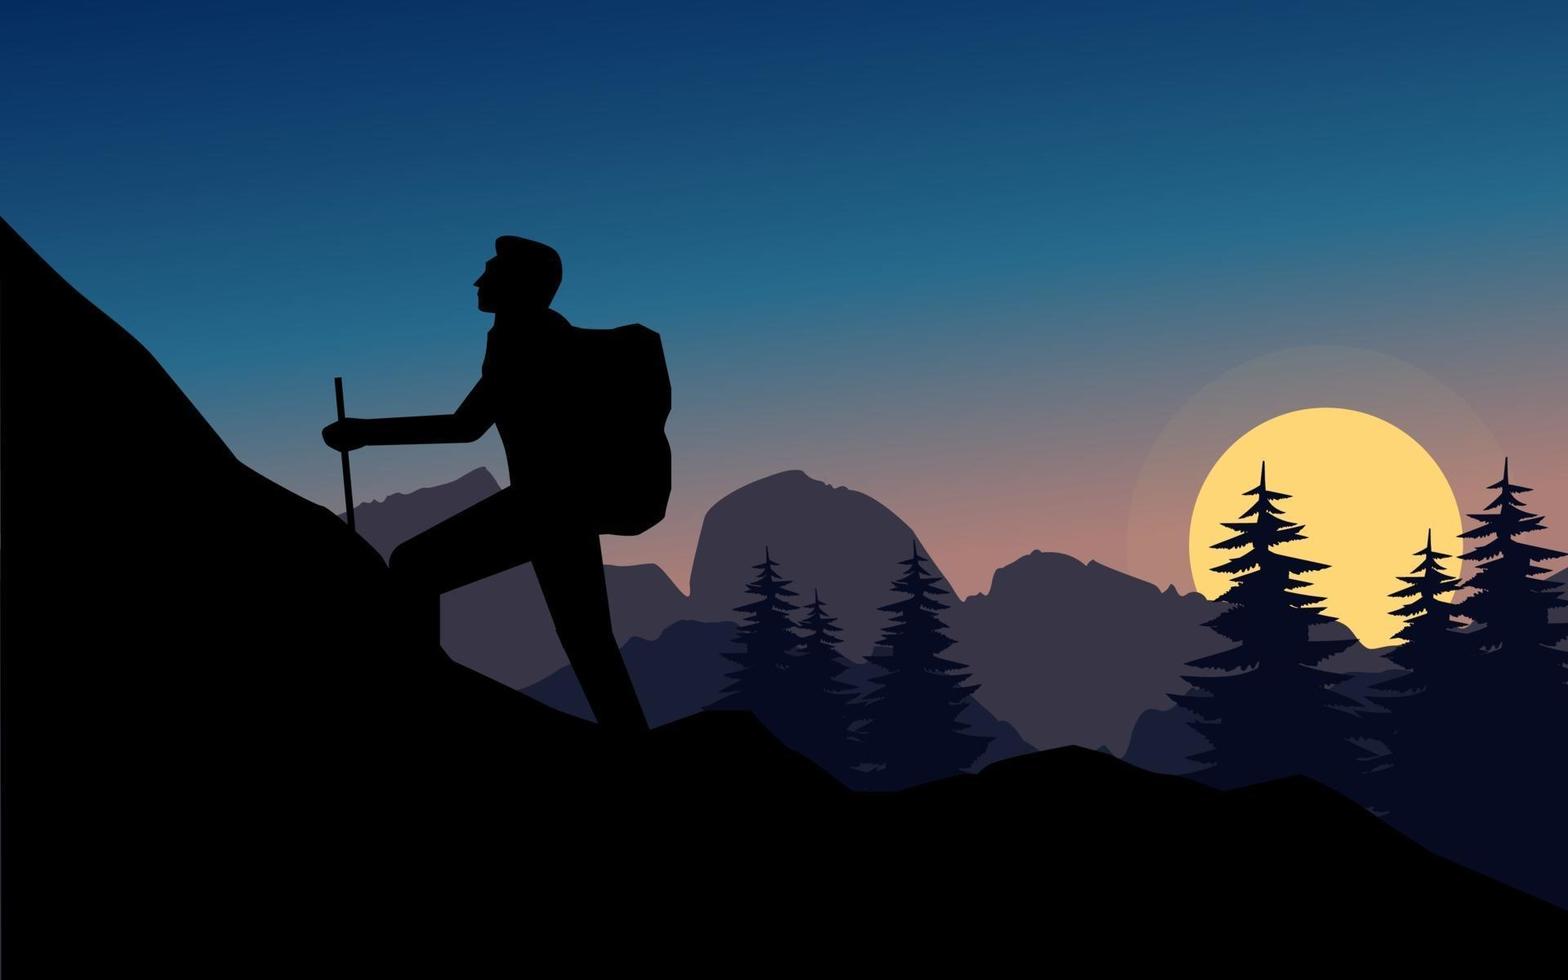 Nature Landscape In Silhouette With Man Climbing Mountain vector